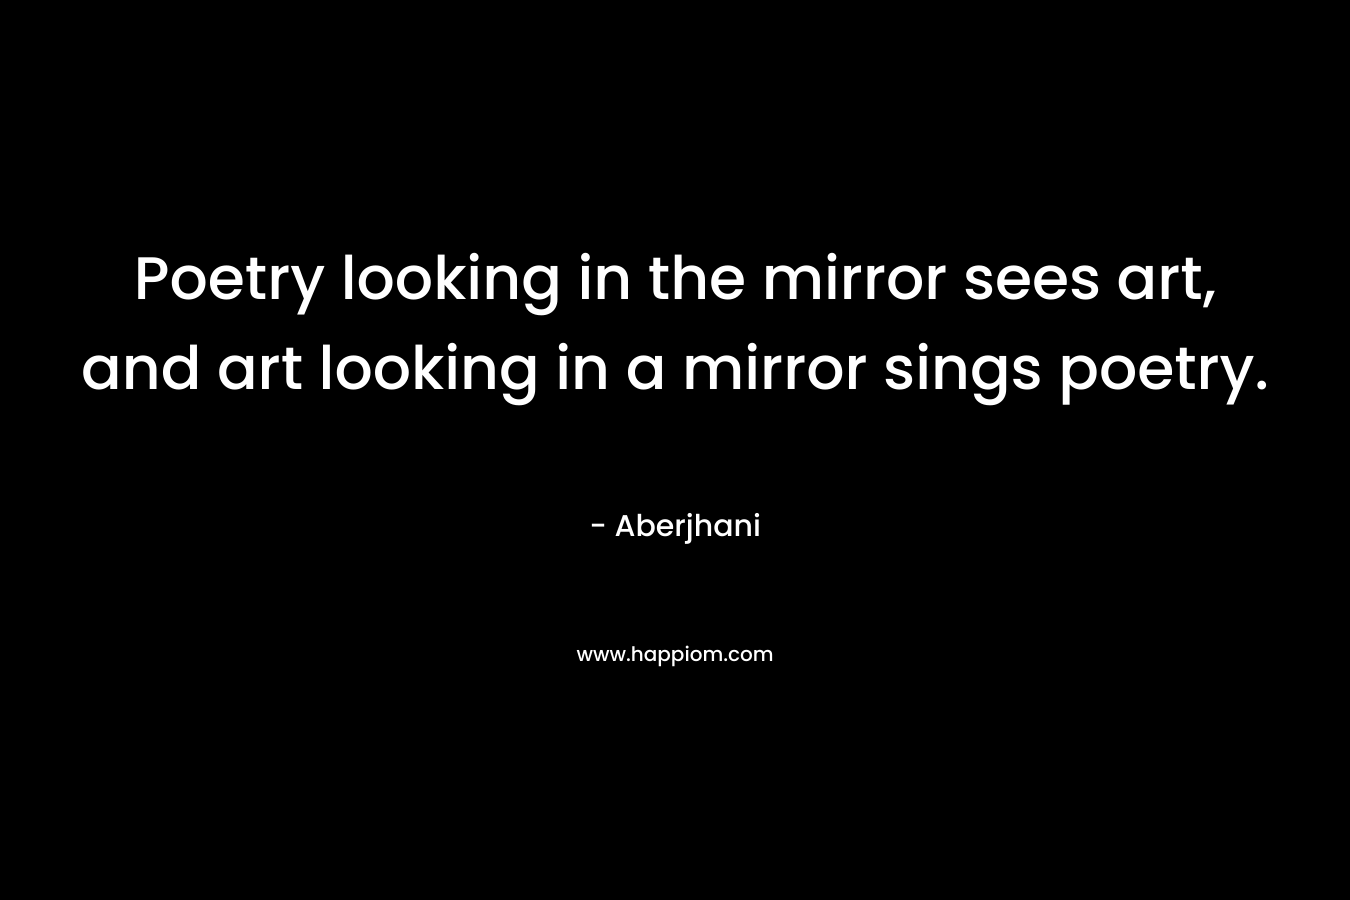 Poetry looking in the mirror sees art, and art looking in a mirror sings poetry.